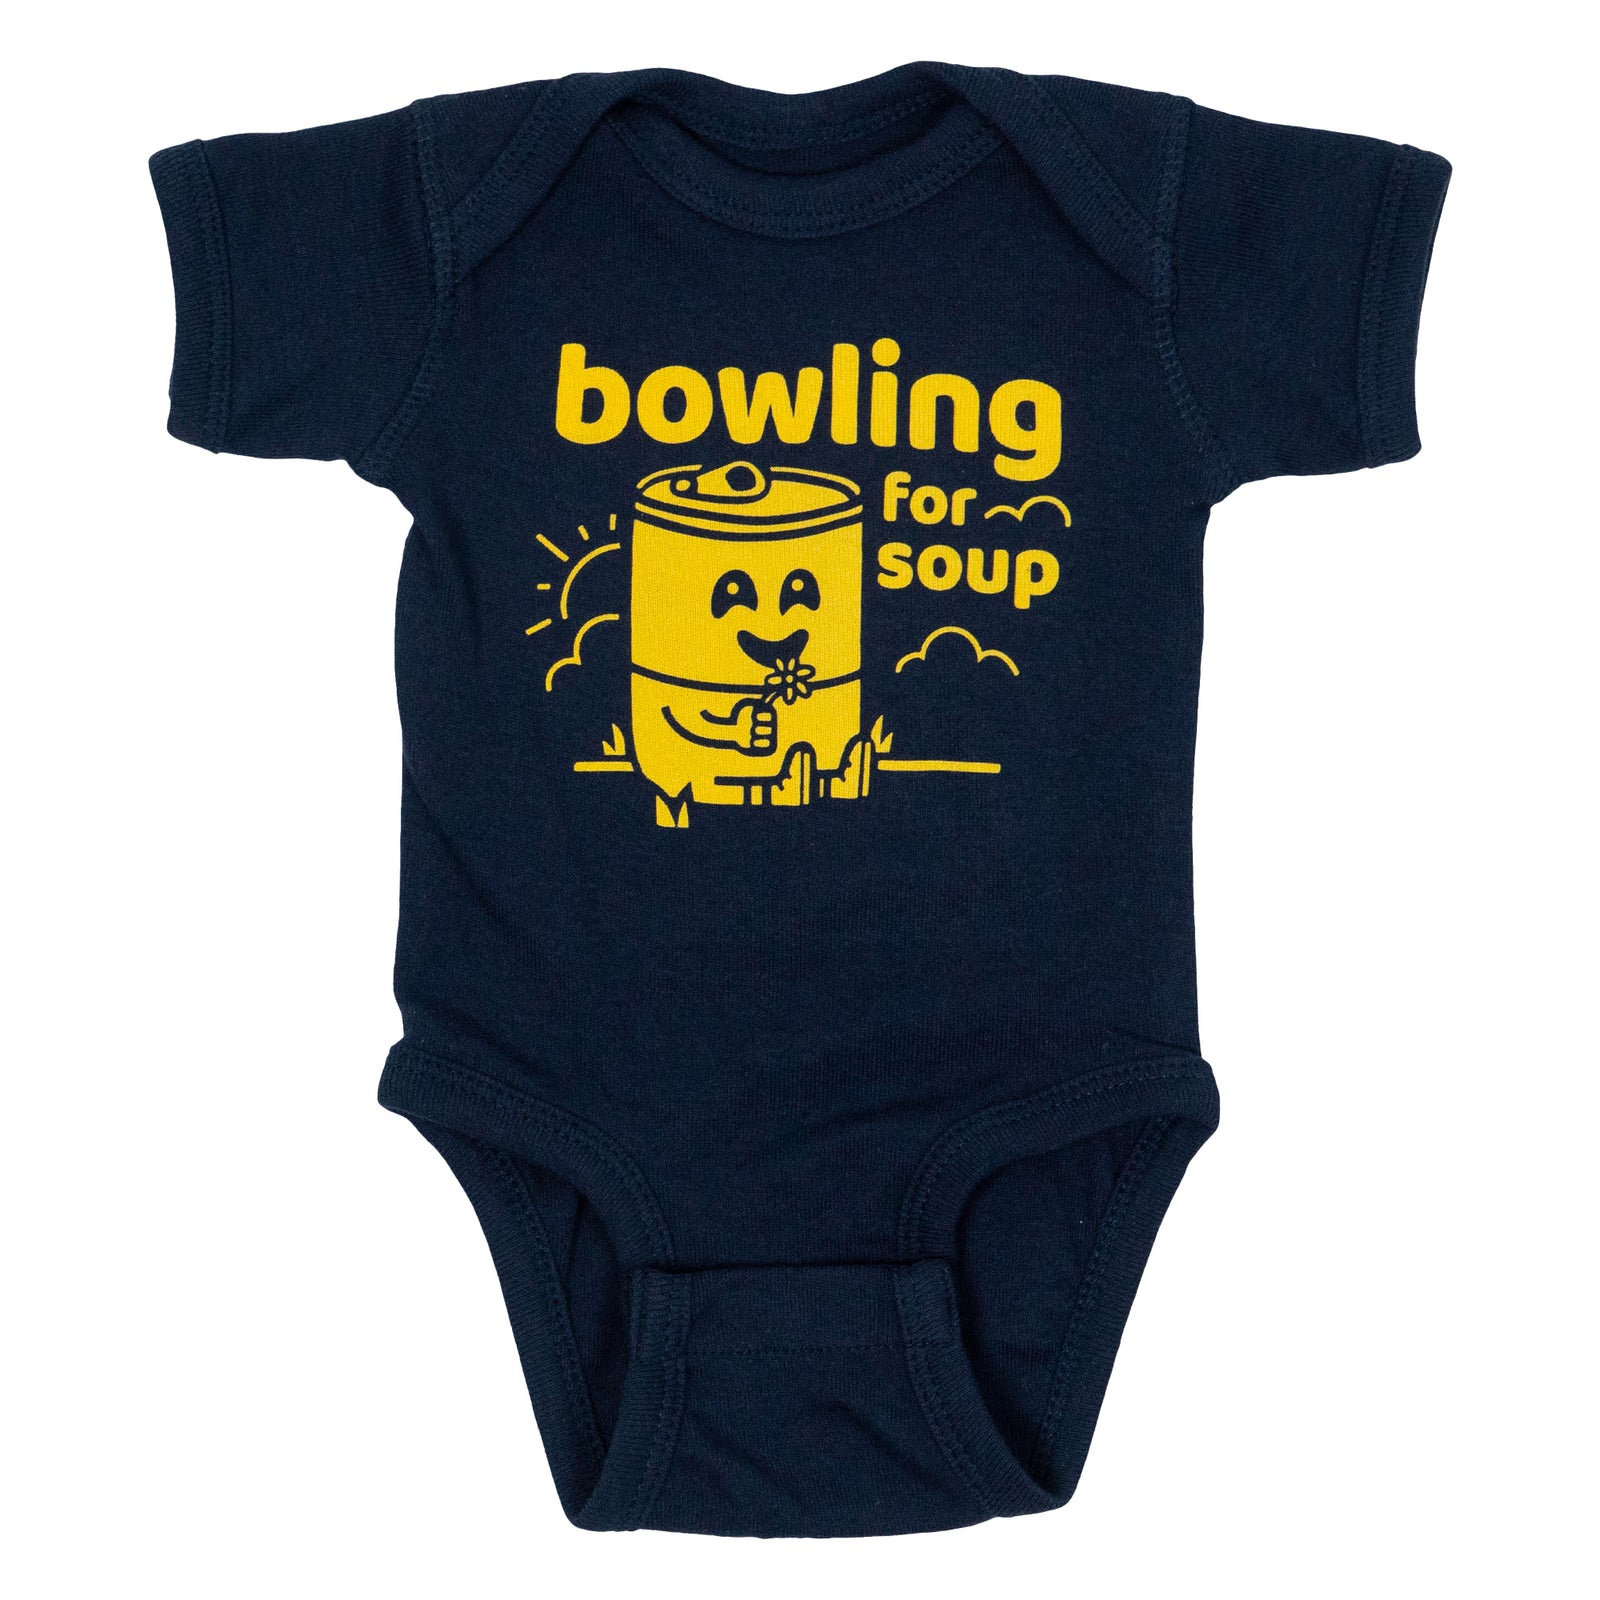 Bowling For Soup Onesie